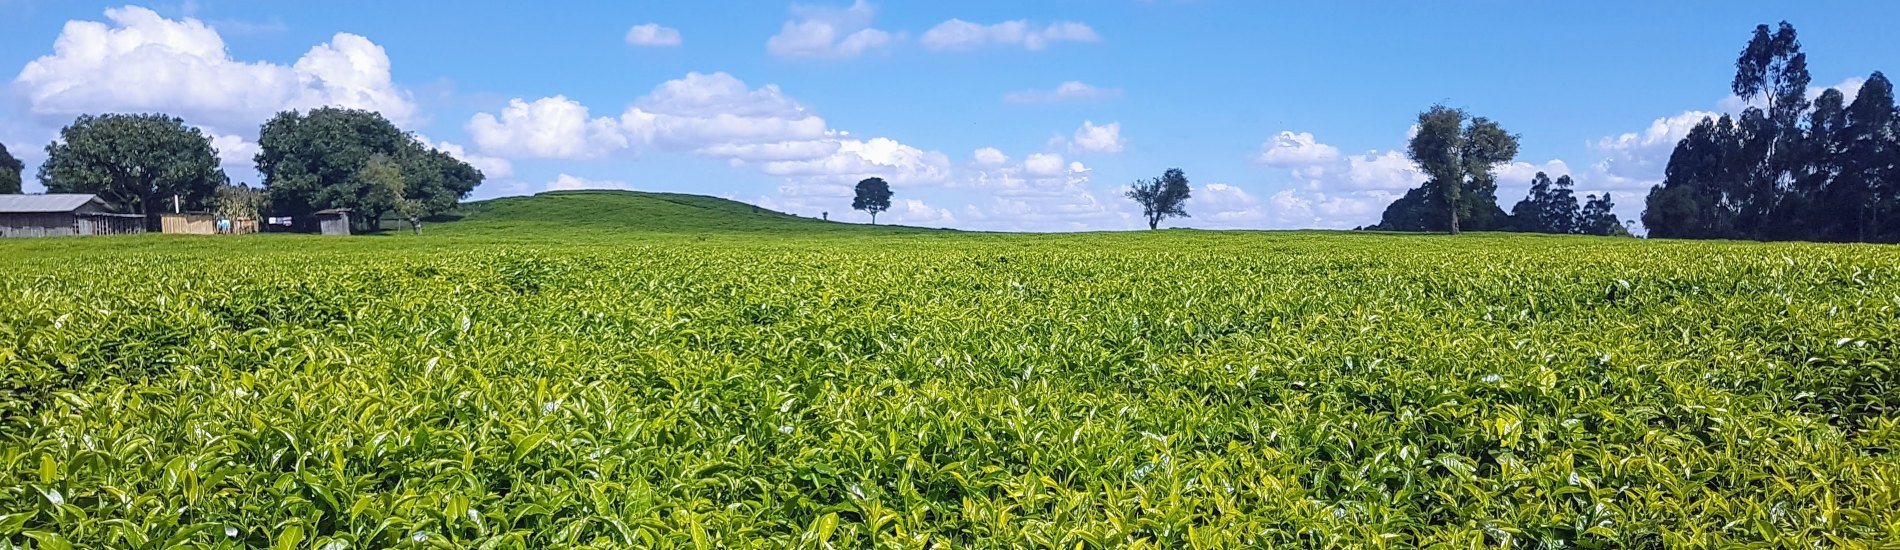 HiFarm: Data Driven Agricultural Intensification Pilot Program for Maize, Coffee and Tea Farmers in Kenya